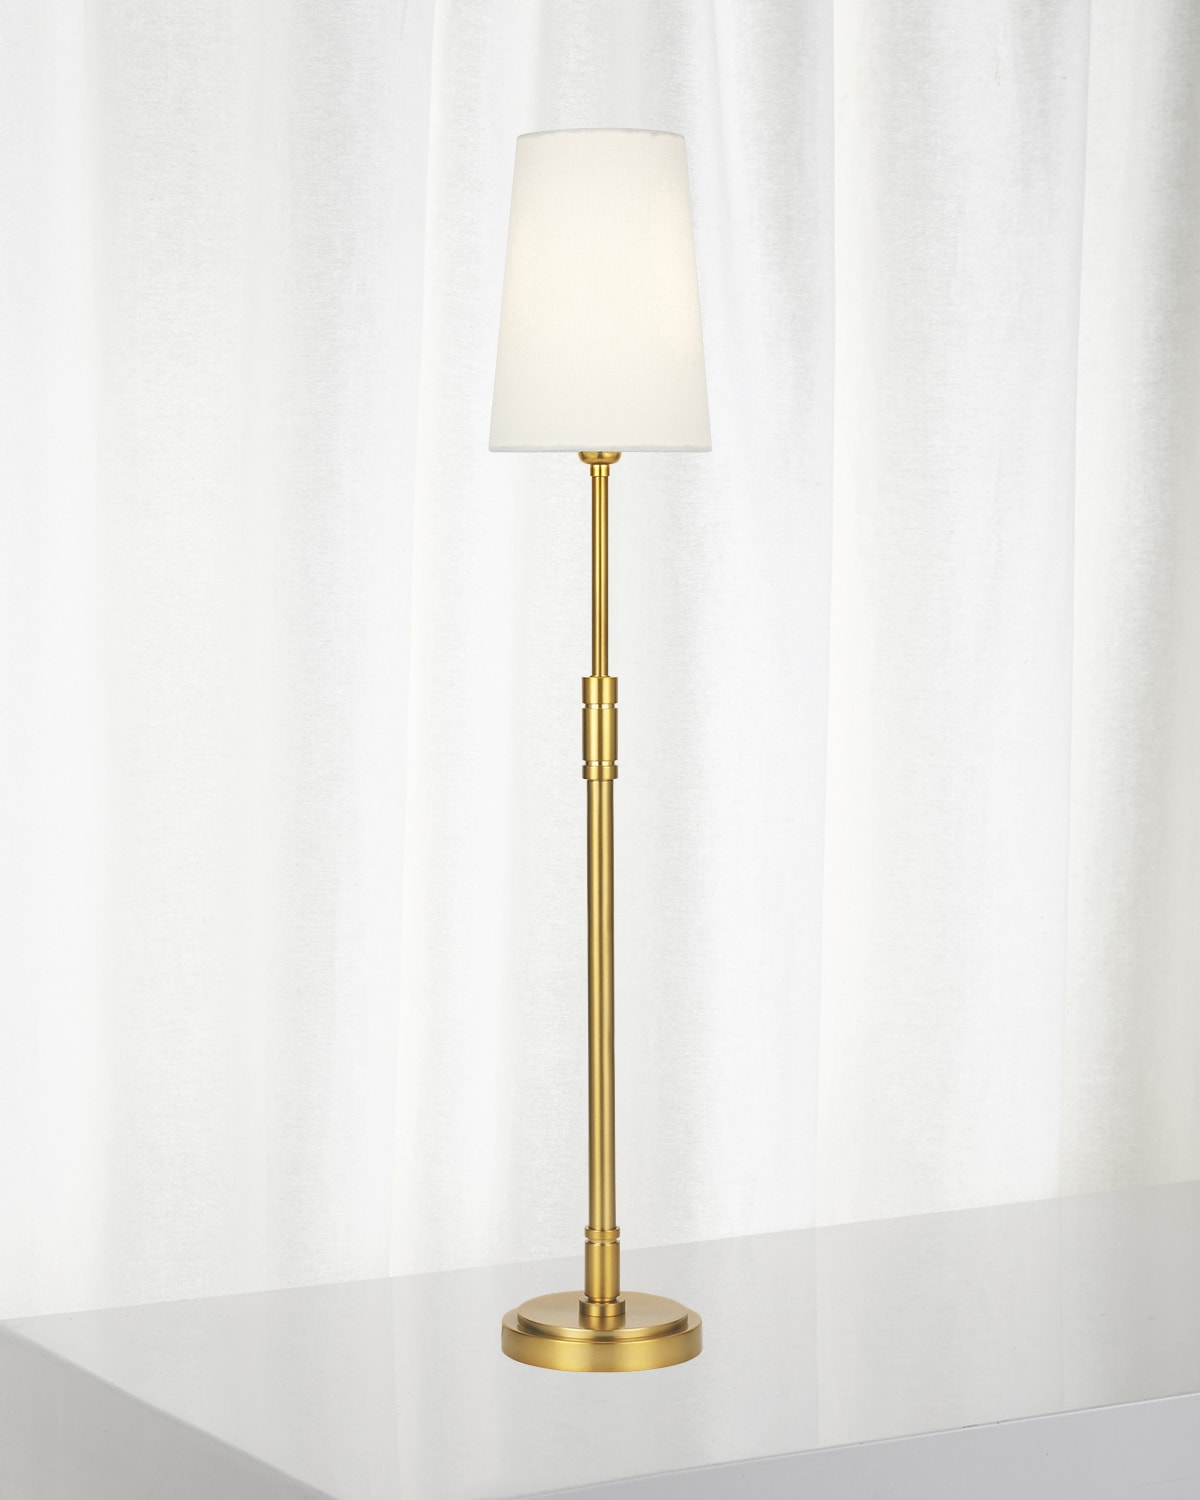 1 - Light Table Lamp Beckham Classic By Thomas O'Brien